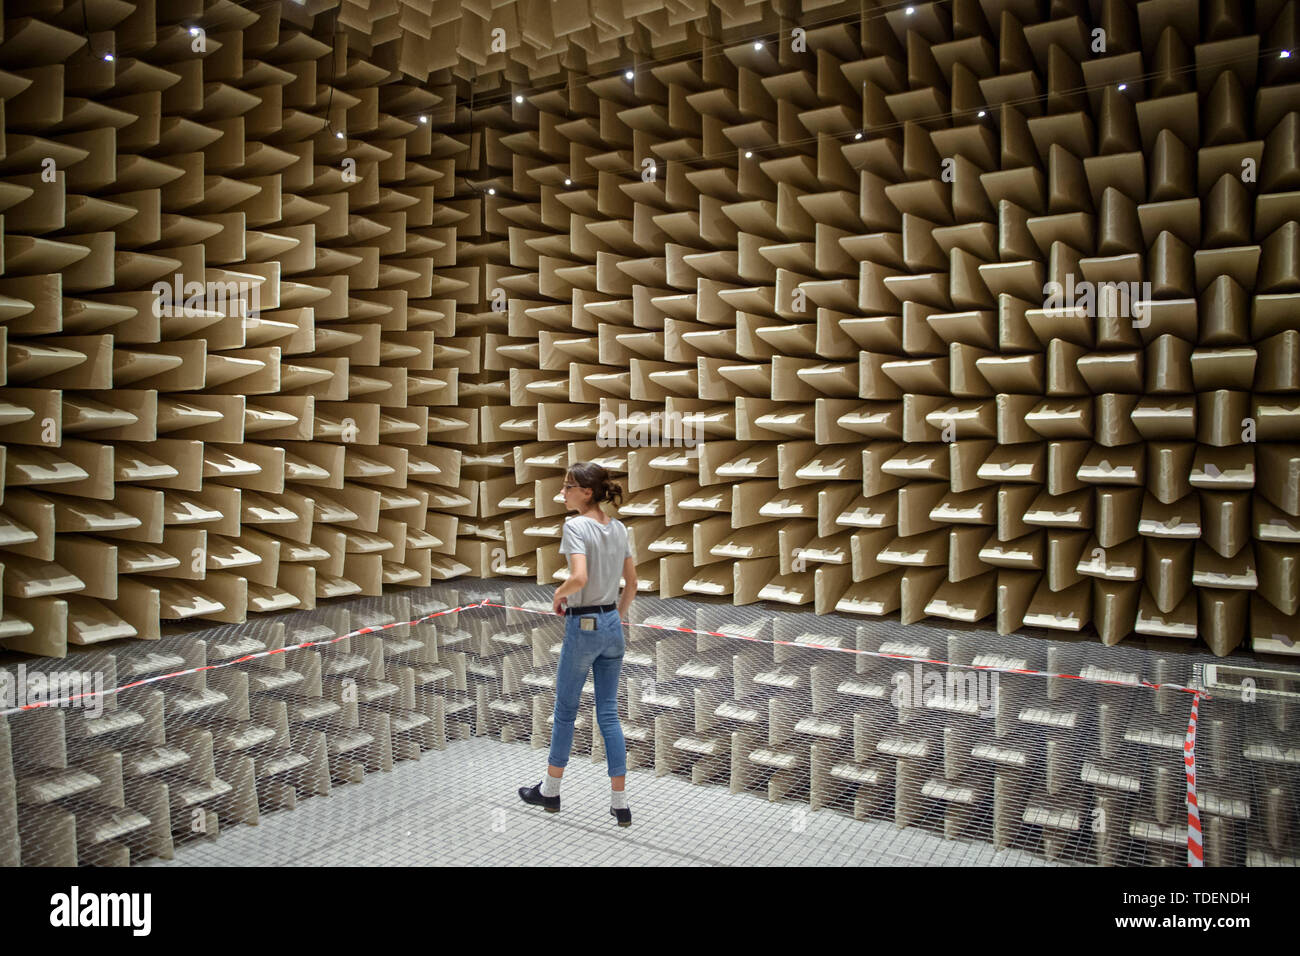 Berlin, Germany. 15th June, 2019. During the Long Night of the Museums at the Technical University of Berlin, a visitor stands in an anechoic room. Walls, ceiling and floor are manufactured in such a way that they absorb as much sound as possible and the room appears acoustically 'dead'. Credit: Gregor Fischer/dpa/Alamy Live News Stock Photo